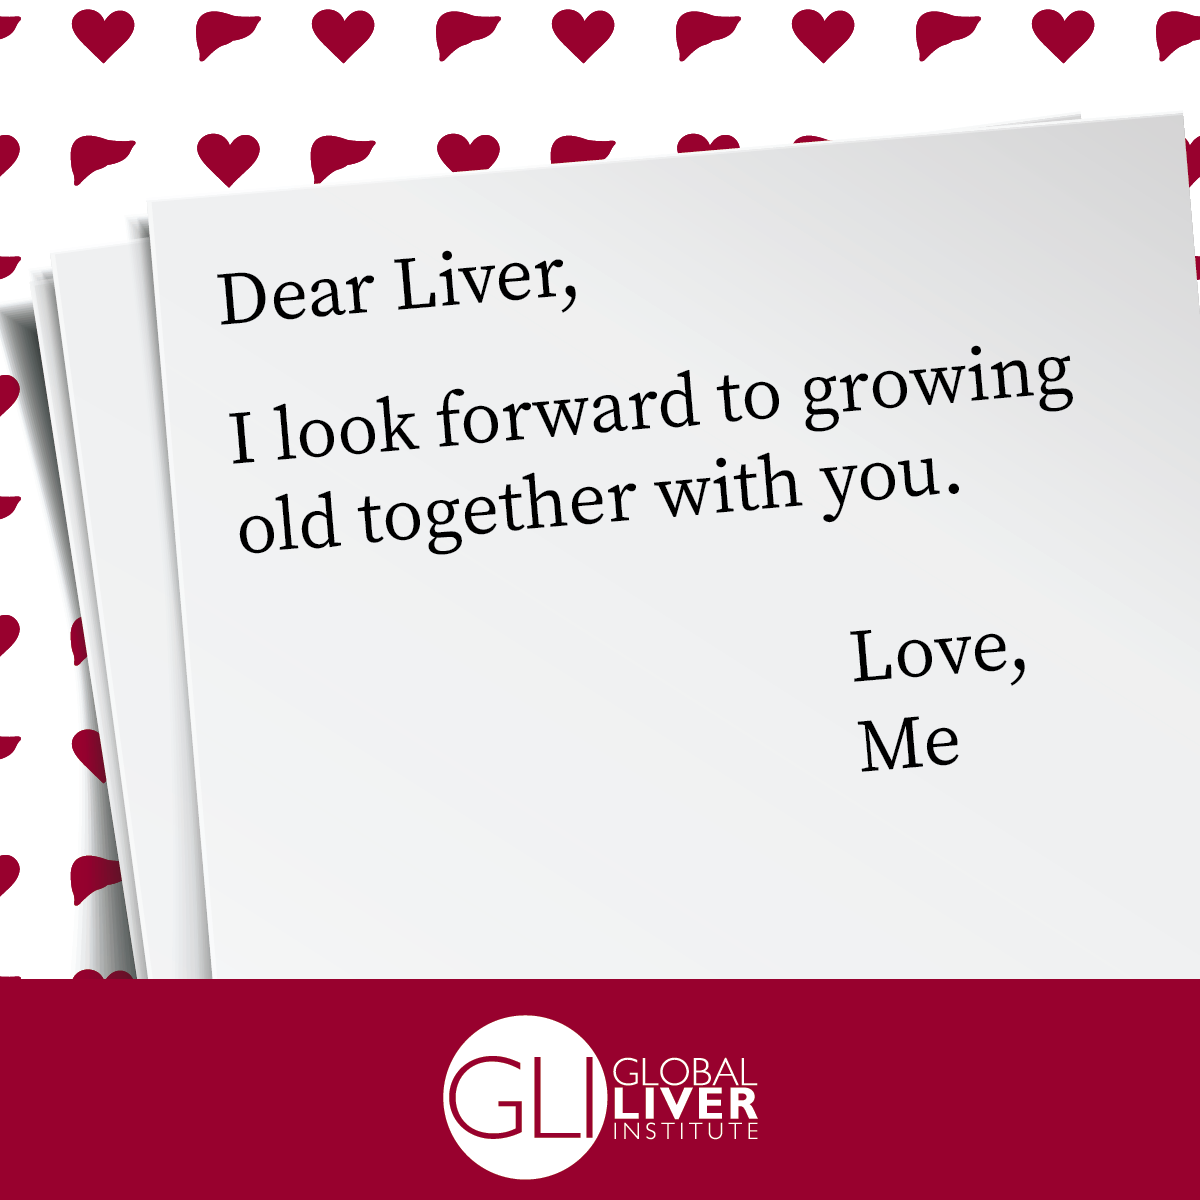 love-letter-to-liver07.png